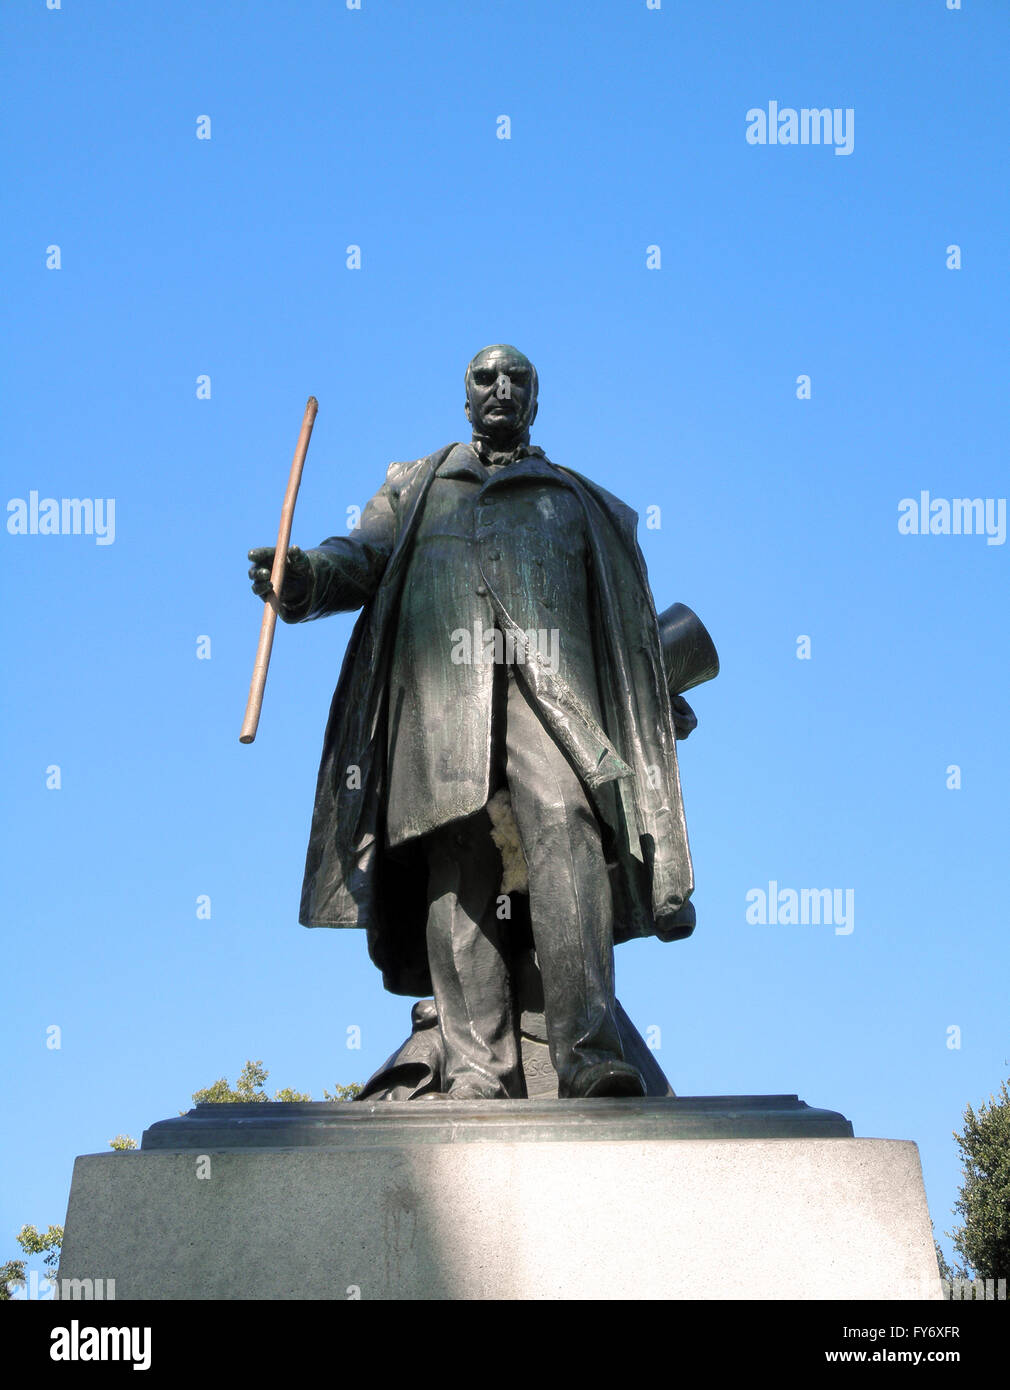 Statue of USA President William McKinley Jr (January 29, 1843 – September 14, 1901) who was the 25th President of the United Sta Stock Photo